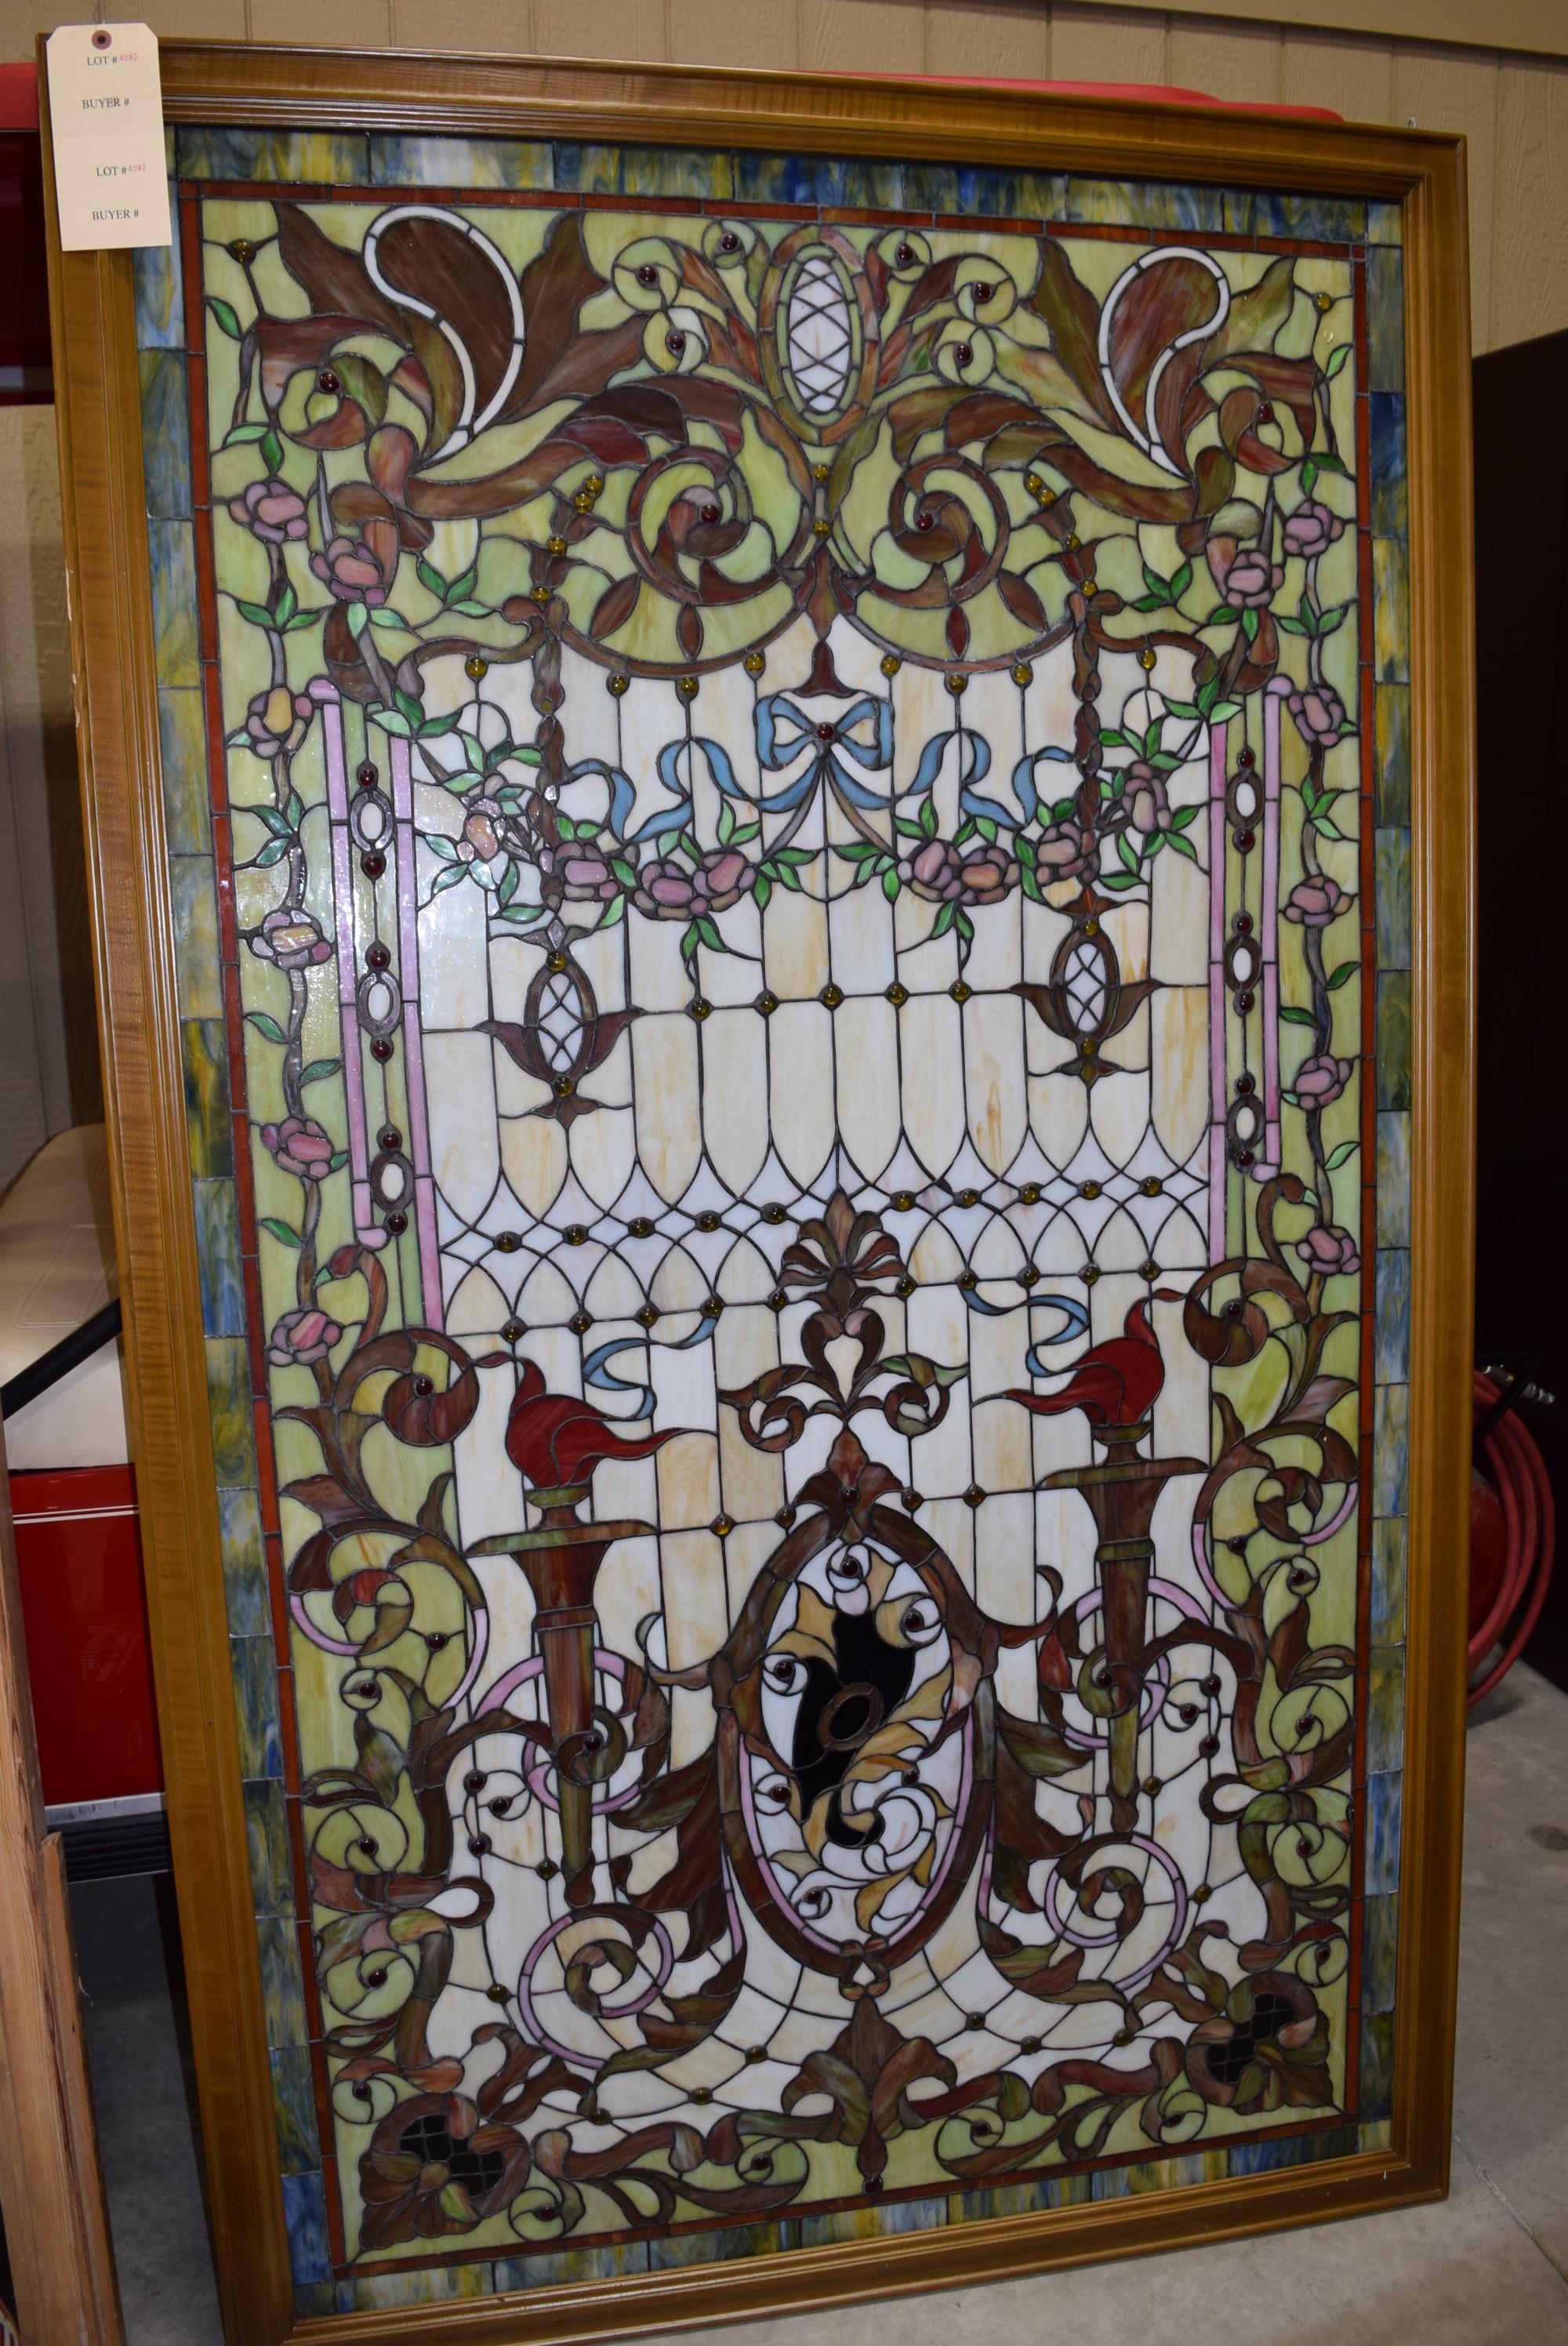 Stained Glass Window 46" wide 75" Tall (Buyer Responsible for Shipping Arrangements)